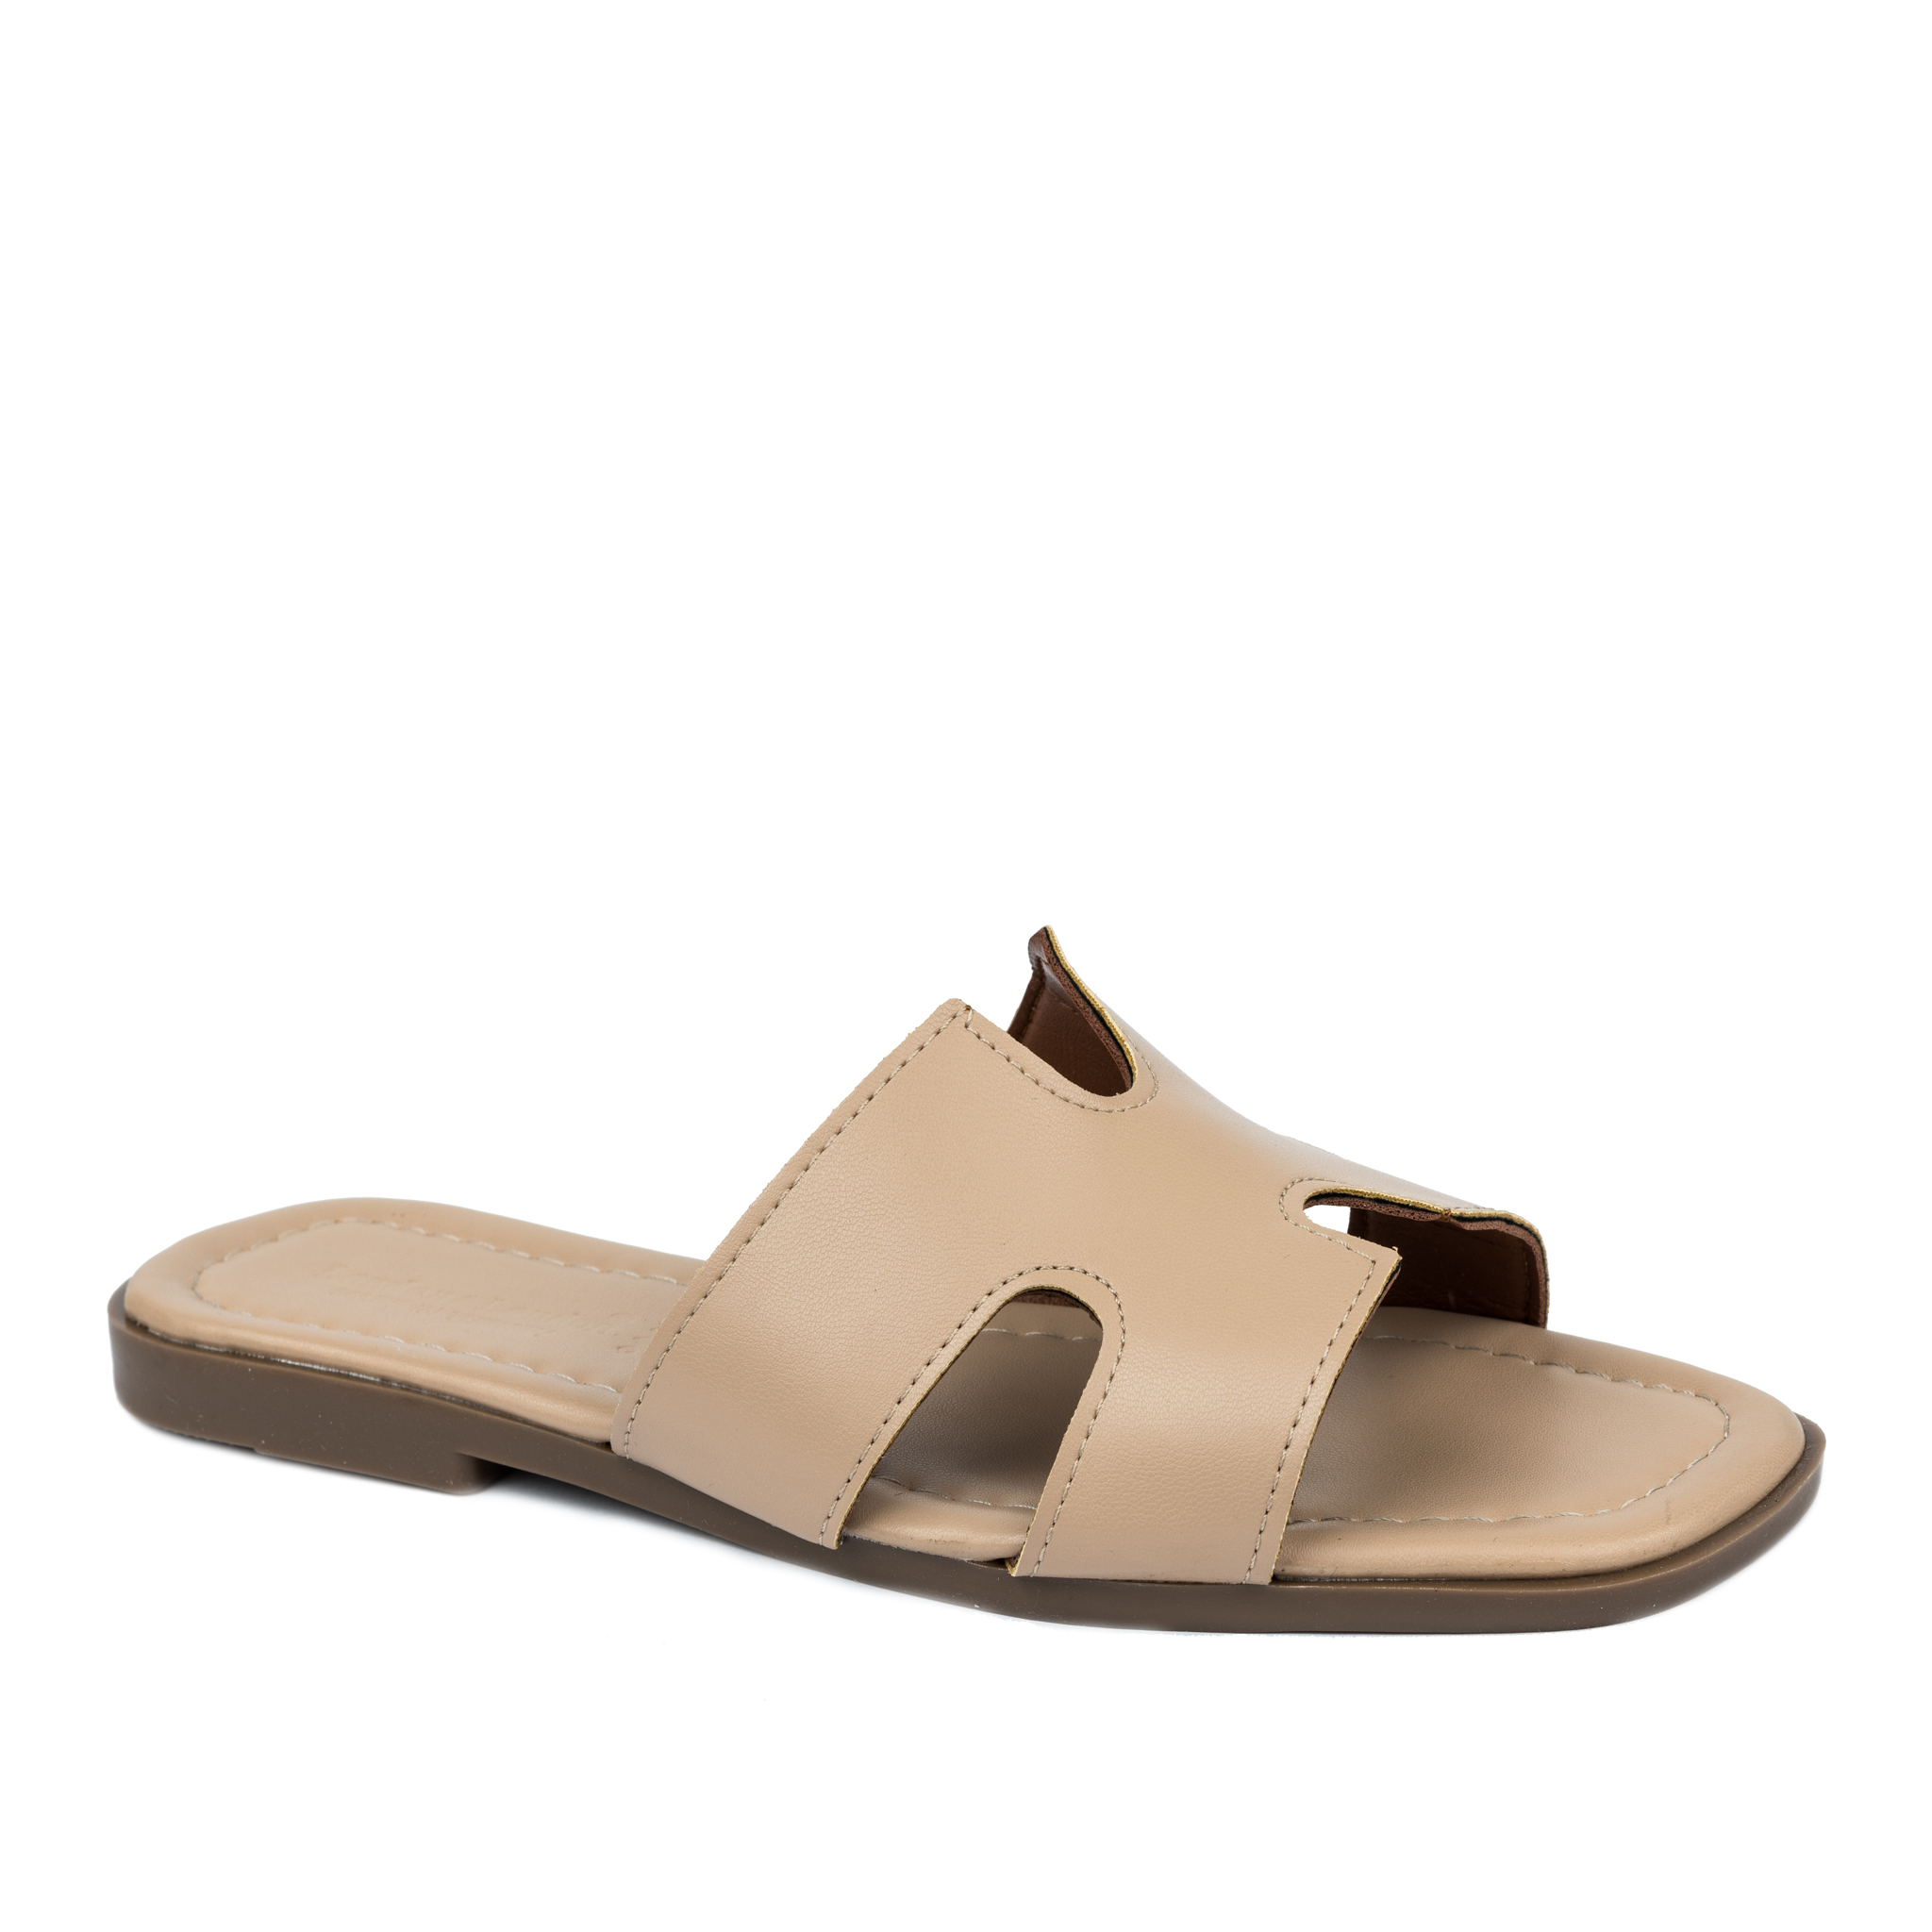 Women Slippers and Mules A549 - BEIGE